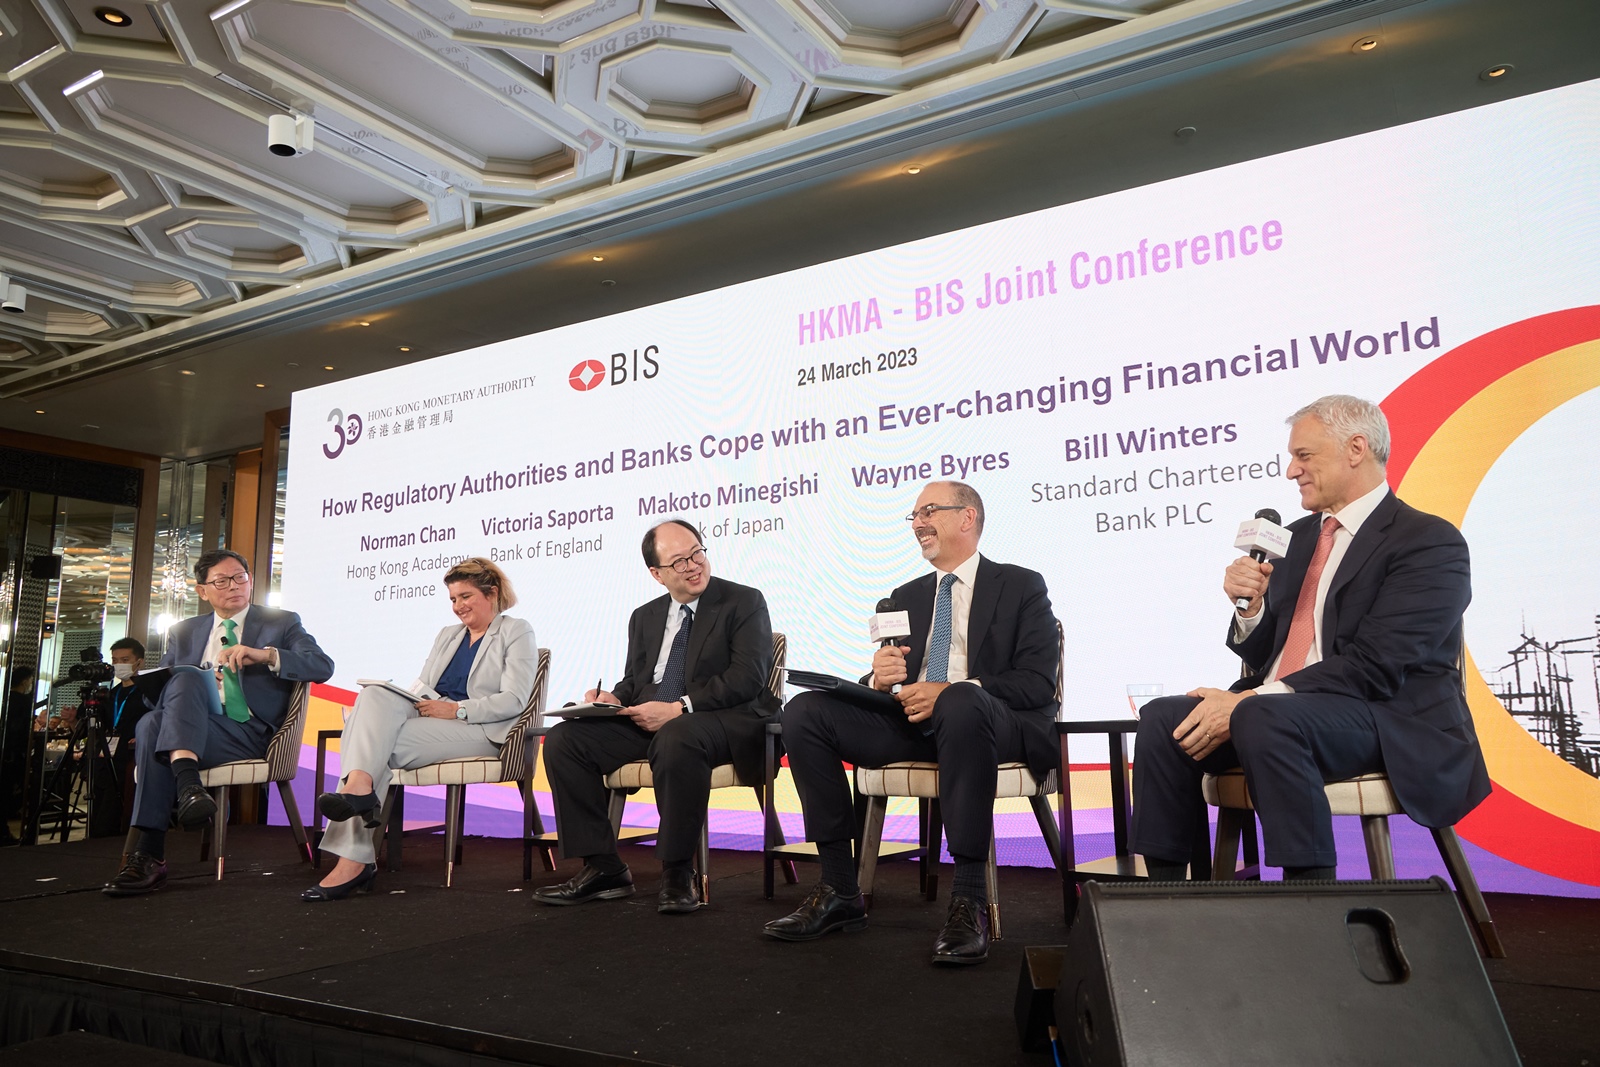 How Regulatory Authorities and Banks Cope with an Ever-changing Financial World